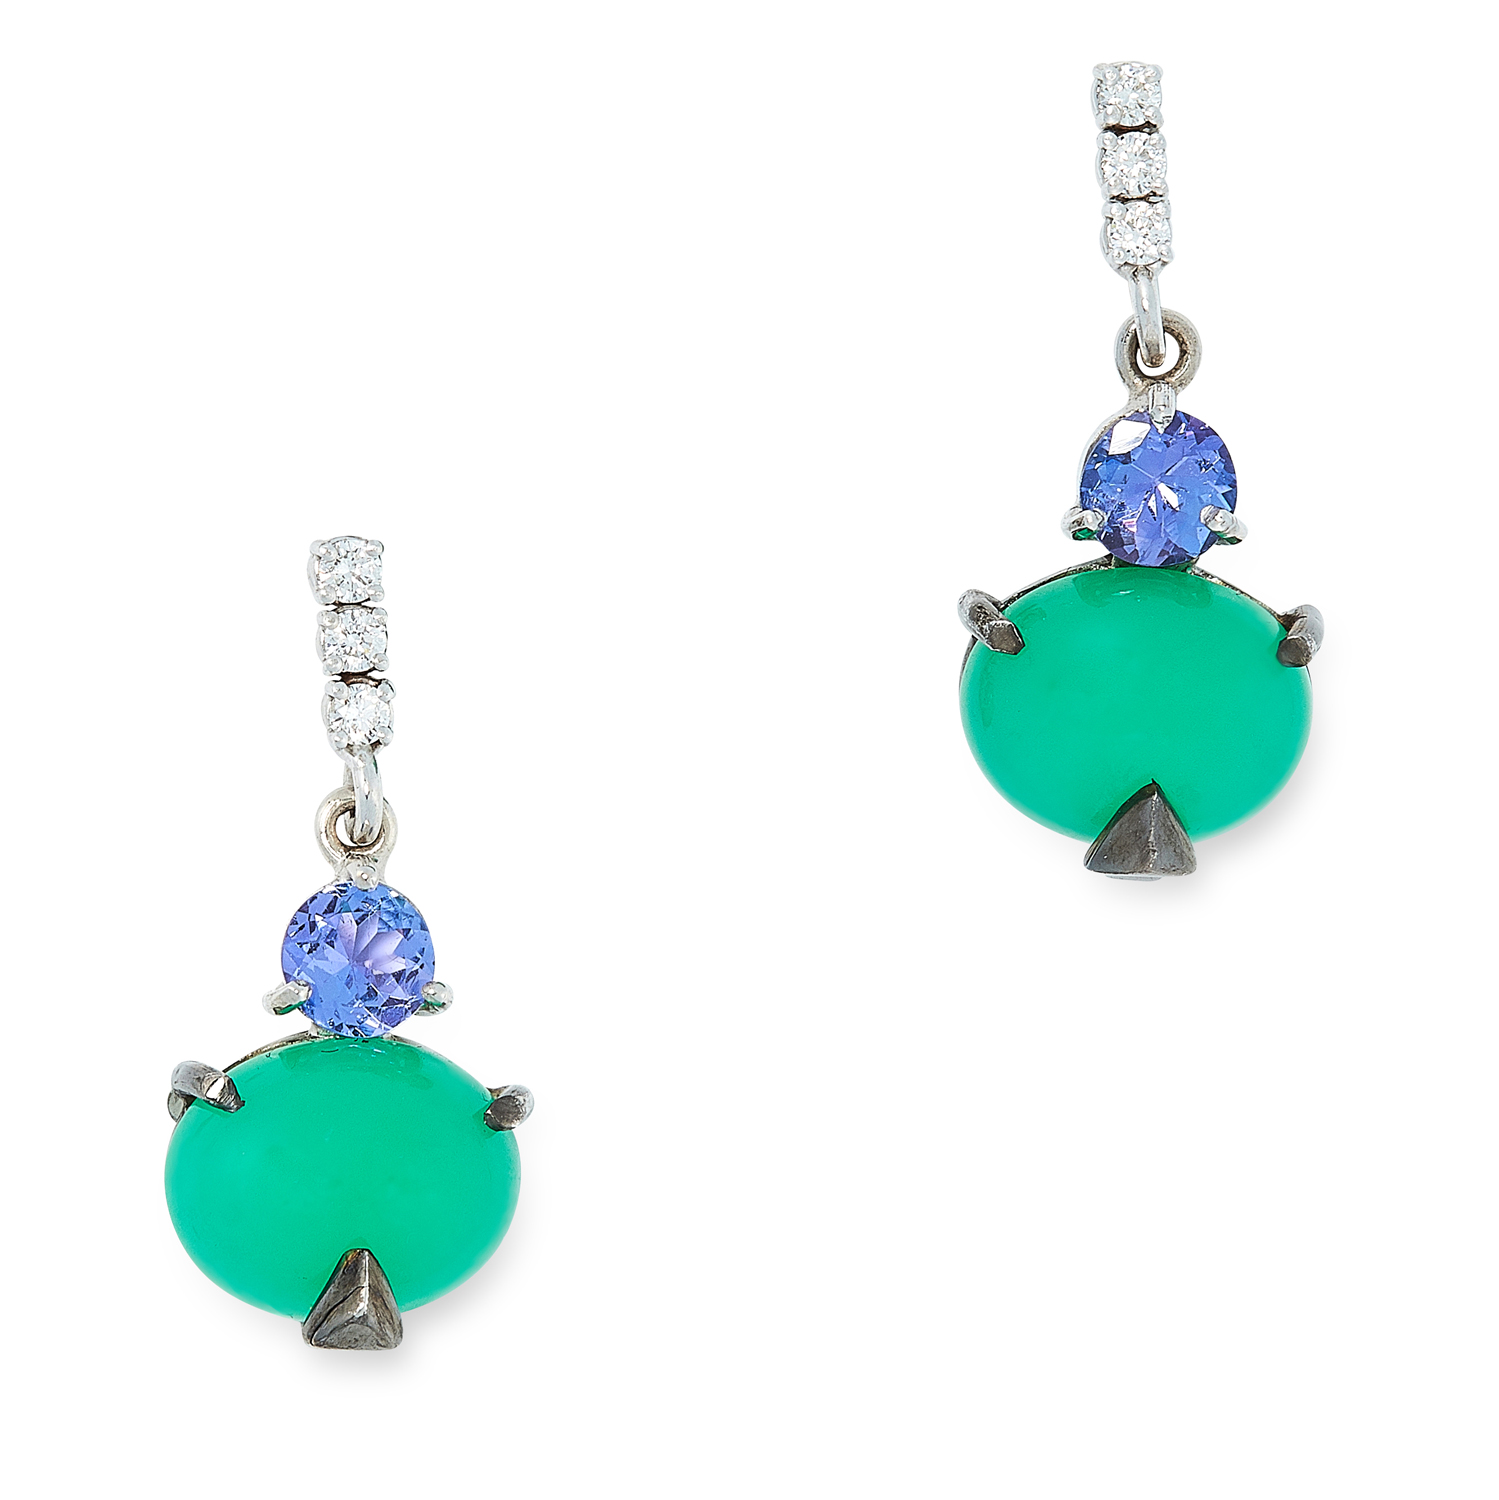 A PAIR OF TANZANITE, DIAMOND AND CHRYSOPRASE EARRINGS each set with round brilliant cut diamonds,